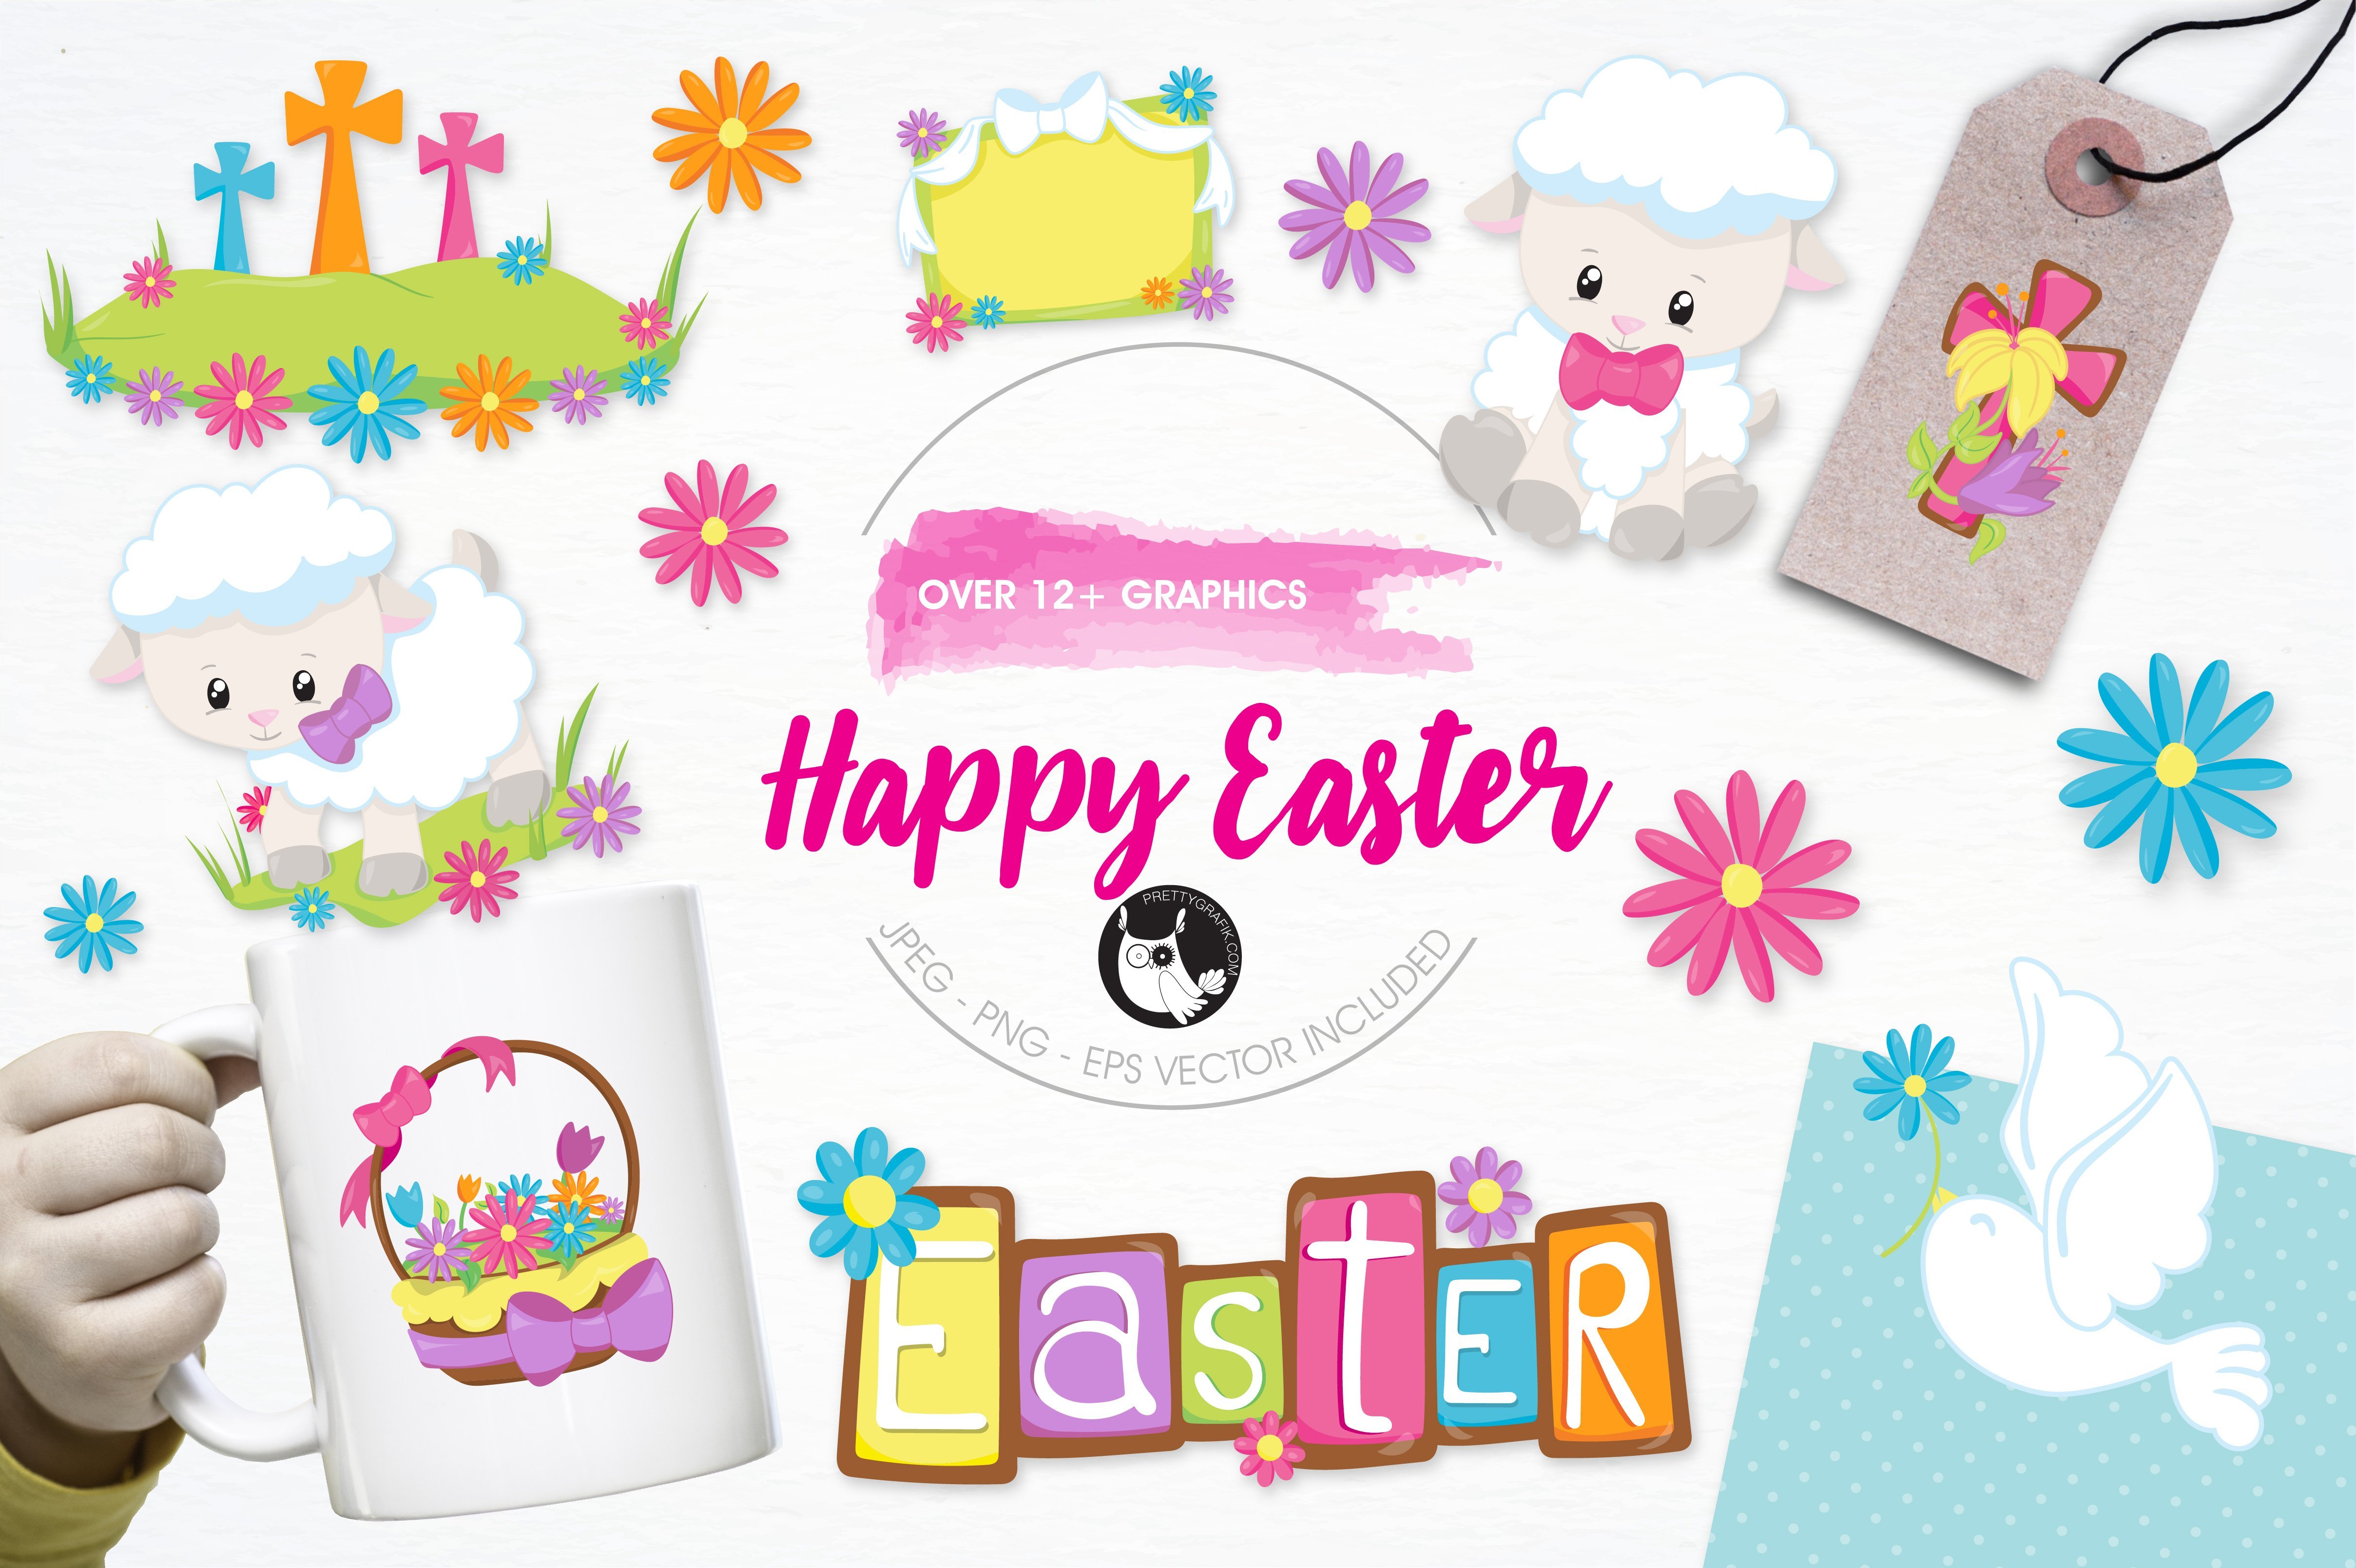 Happy Easter illustration pack - Vector Image